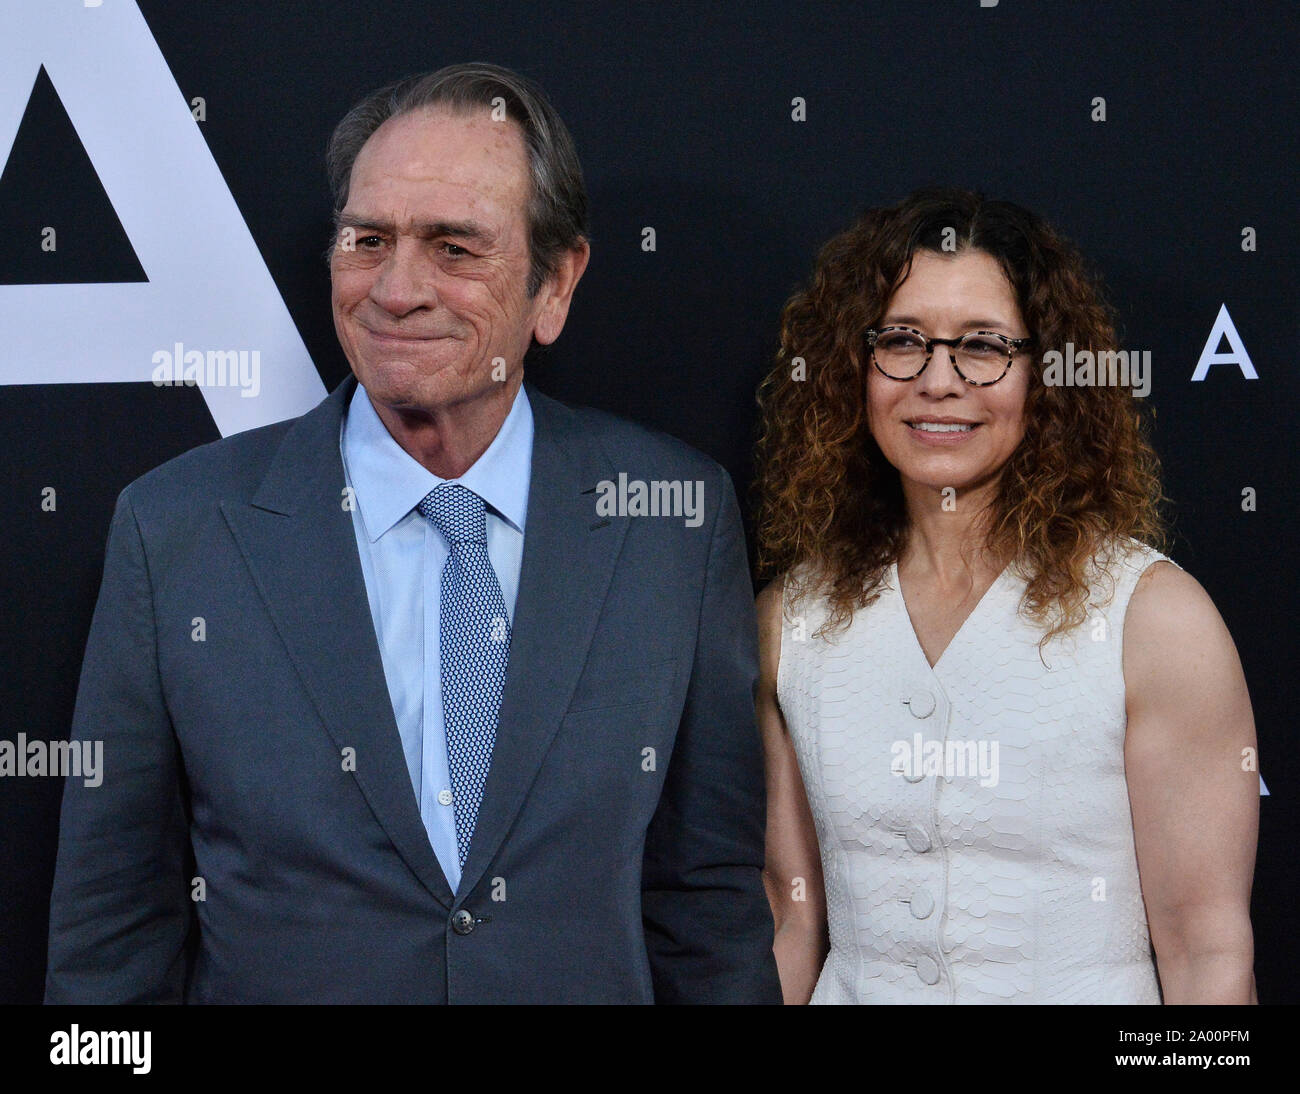 Cast member Tommy Lee Jones and his wife Dawn Laurel-Jones attend the  premiere of the motion picture sci-fi thriller "Ad Astra" at the ArcLight  Cinerama Dome in the Hollywood section of Los